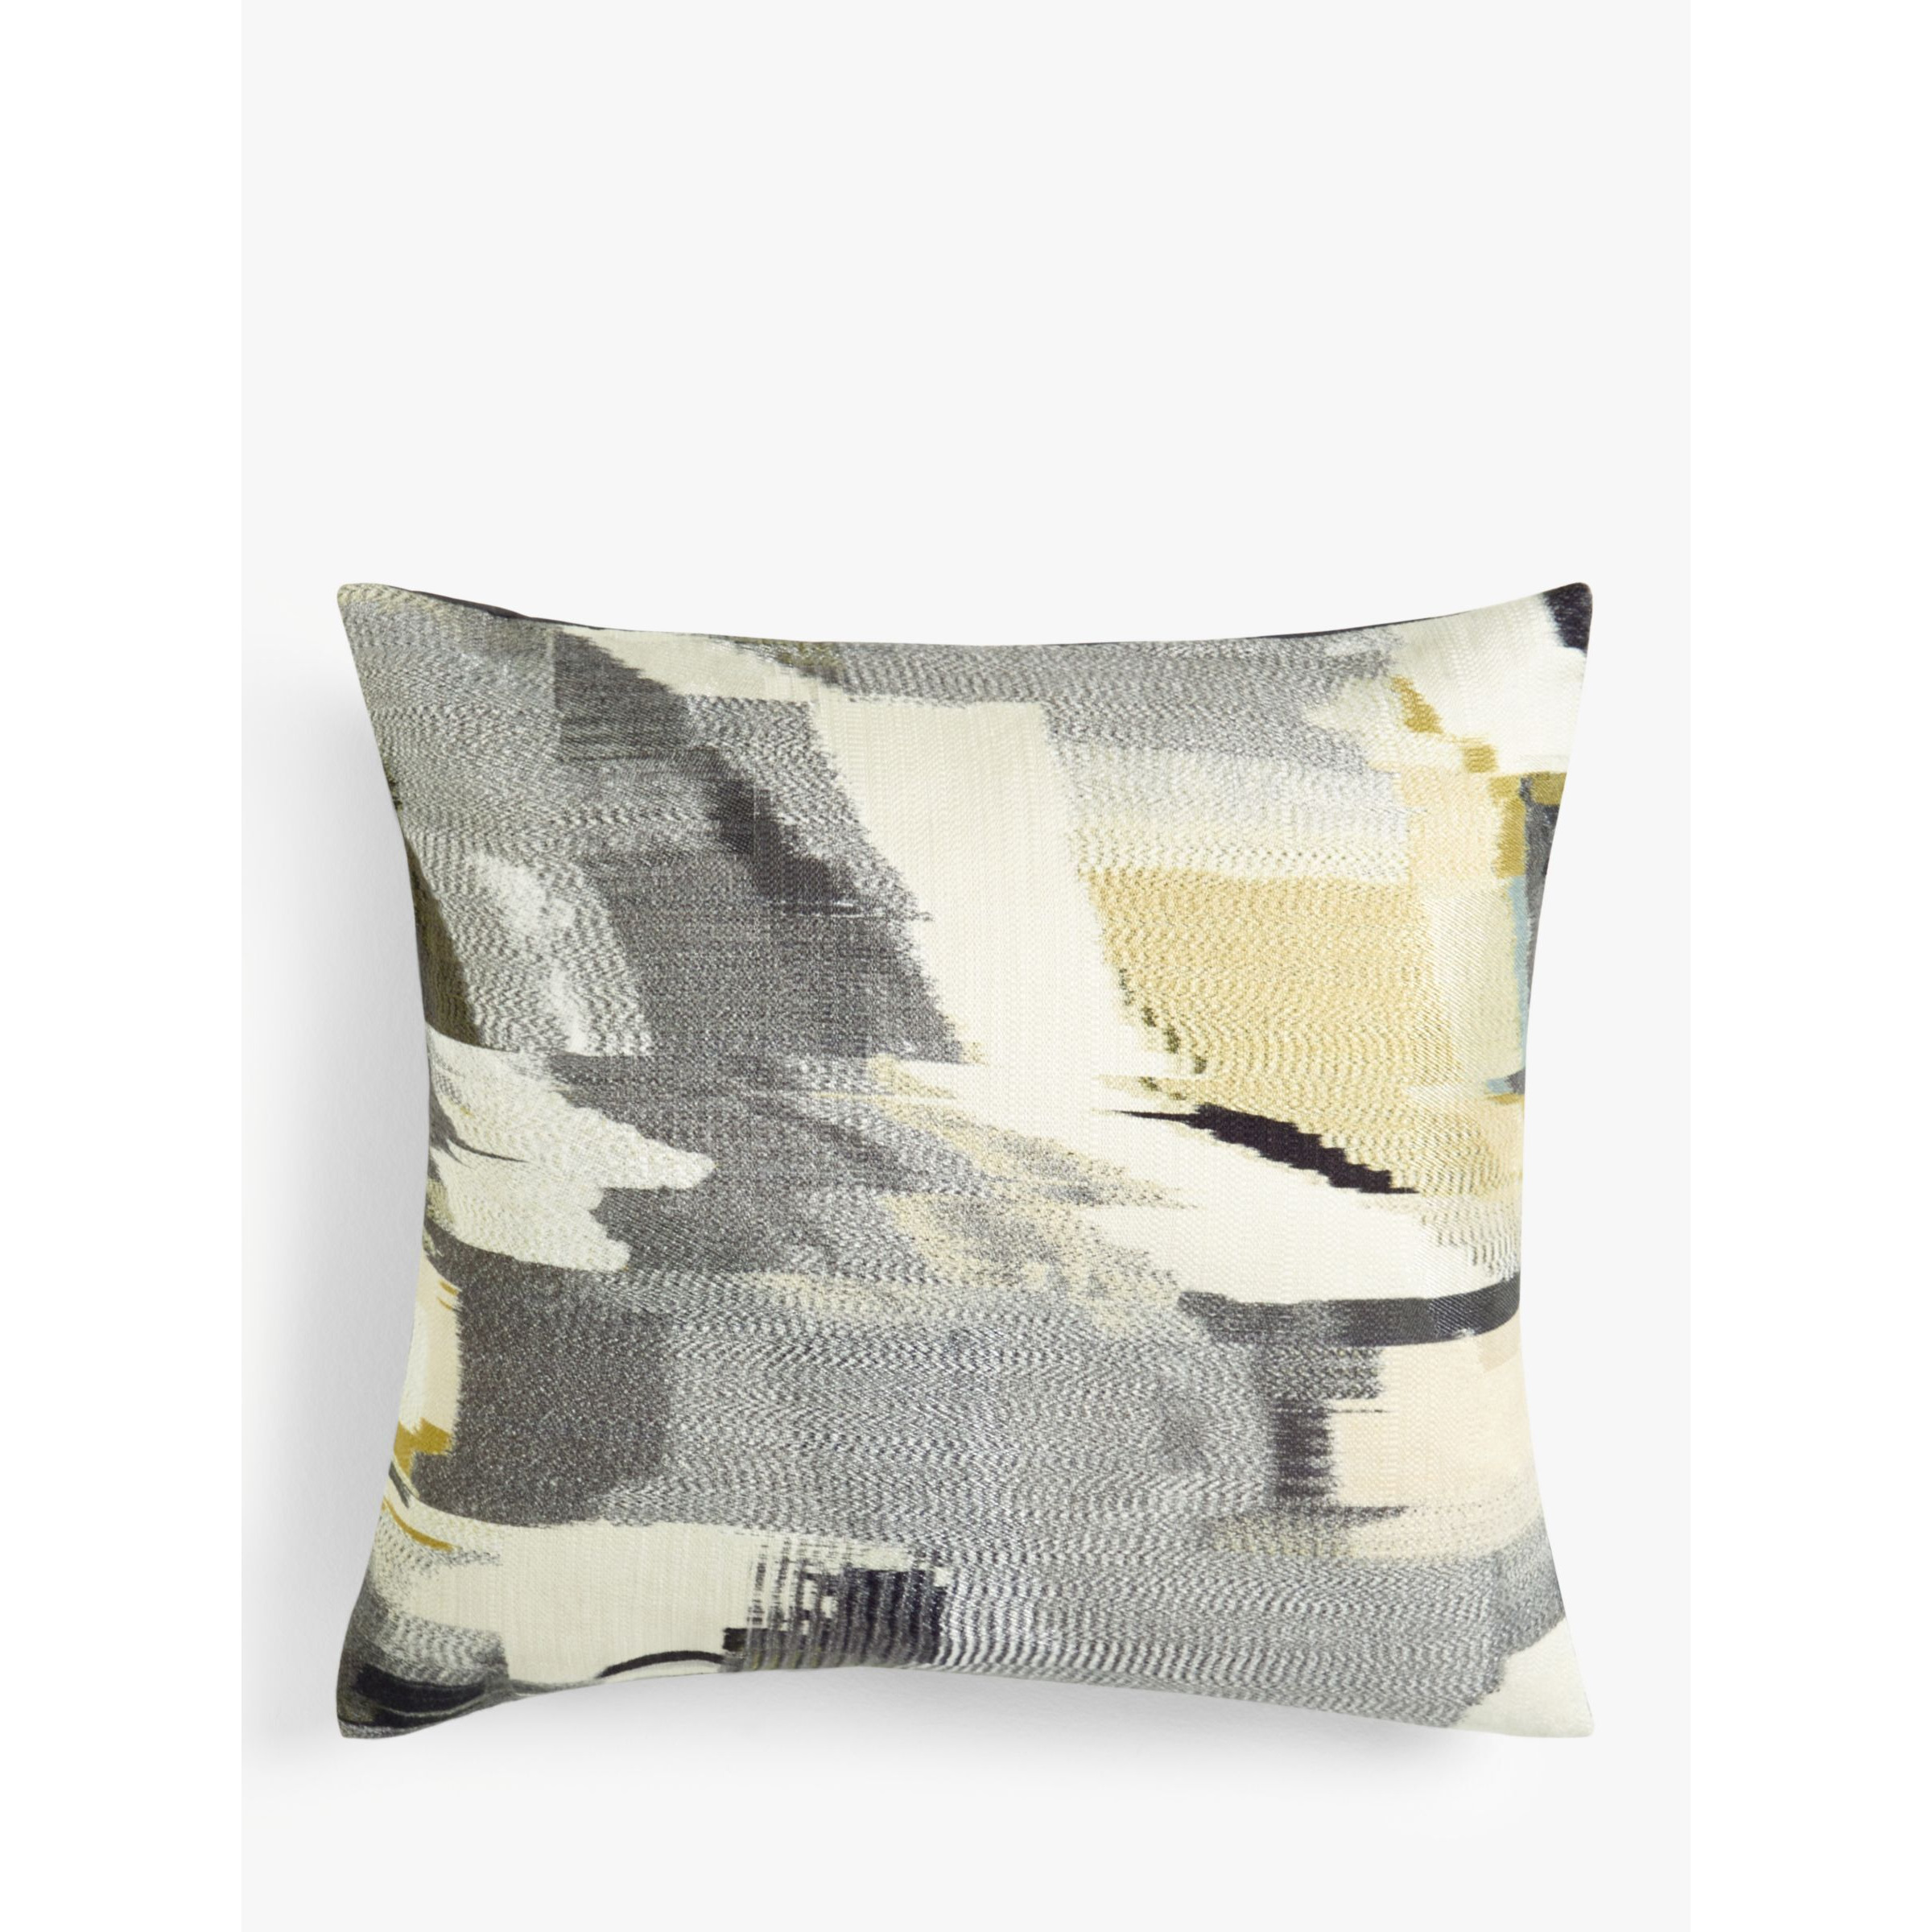 Harlequin Perspective Cushion - image 1